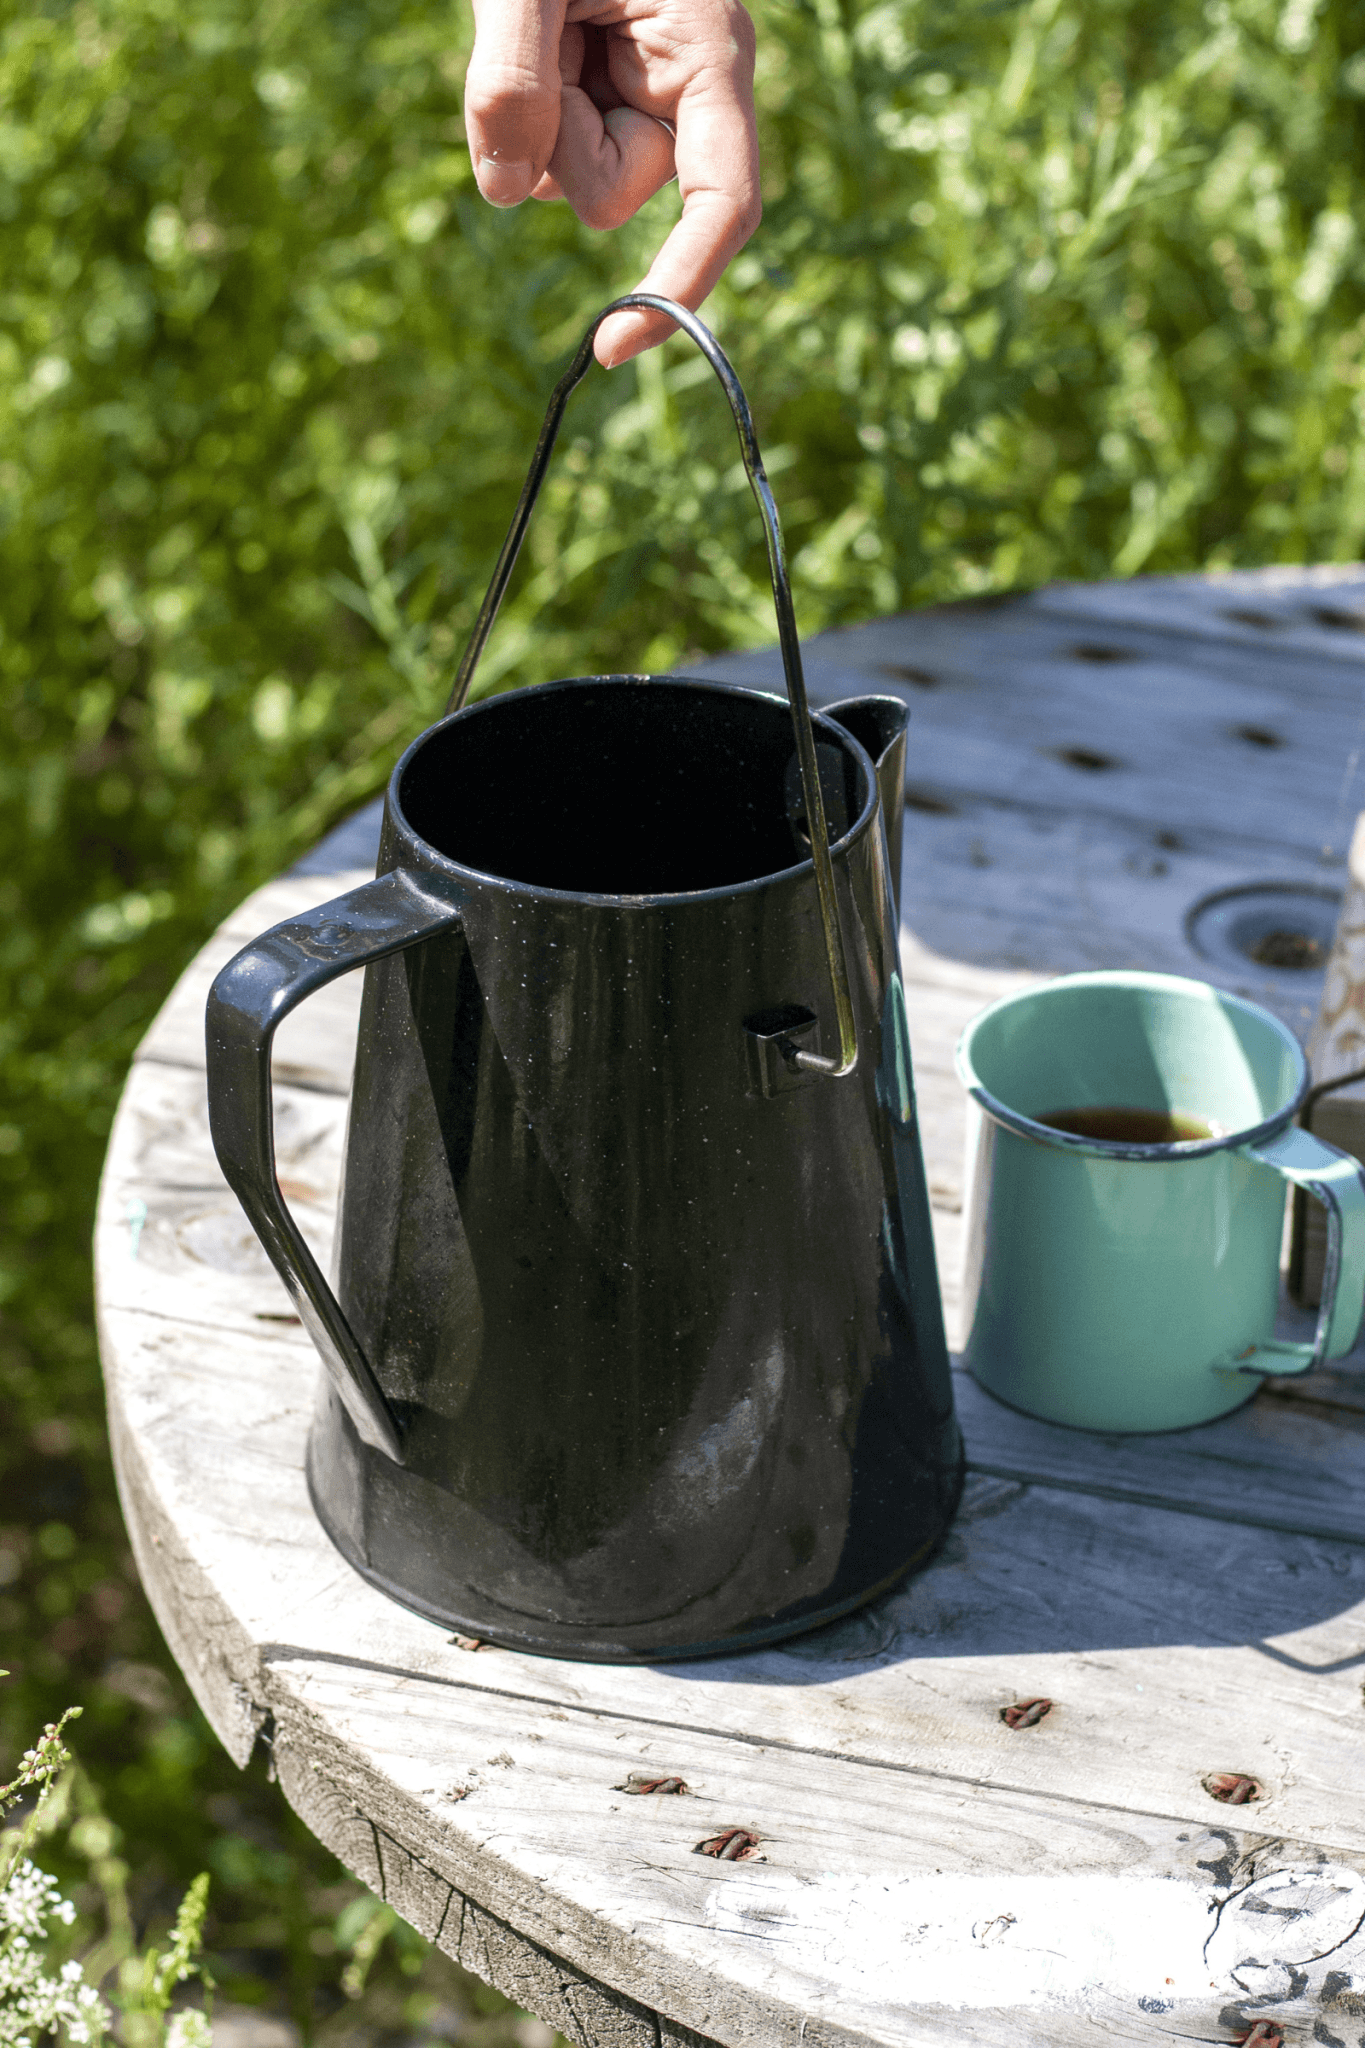 Make authentic cowboy coffee over a campfire with a pot or kettle